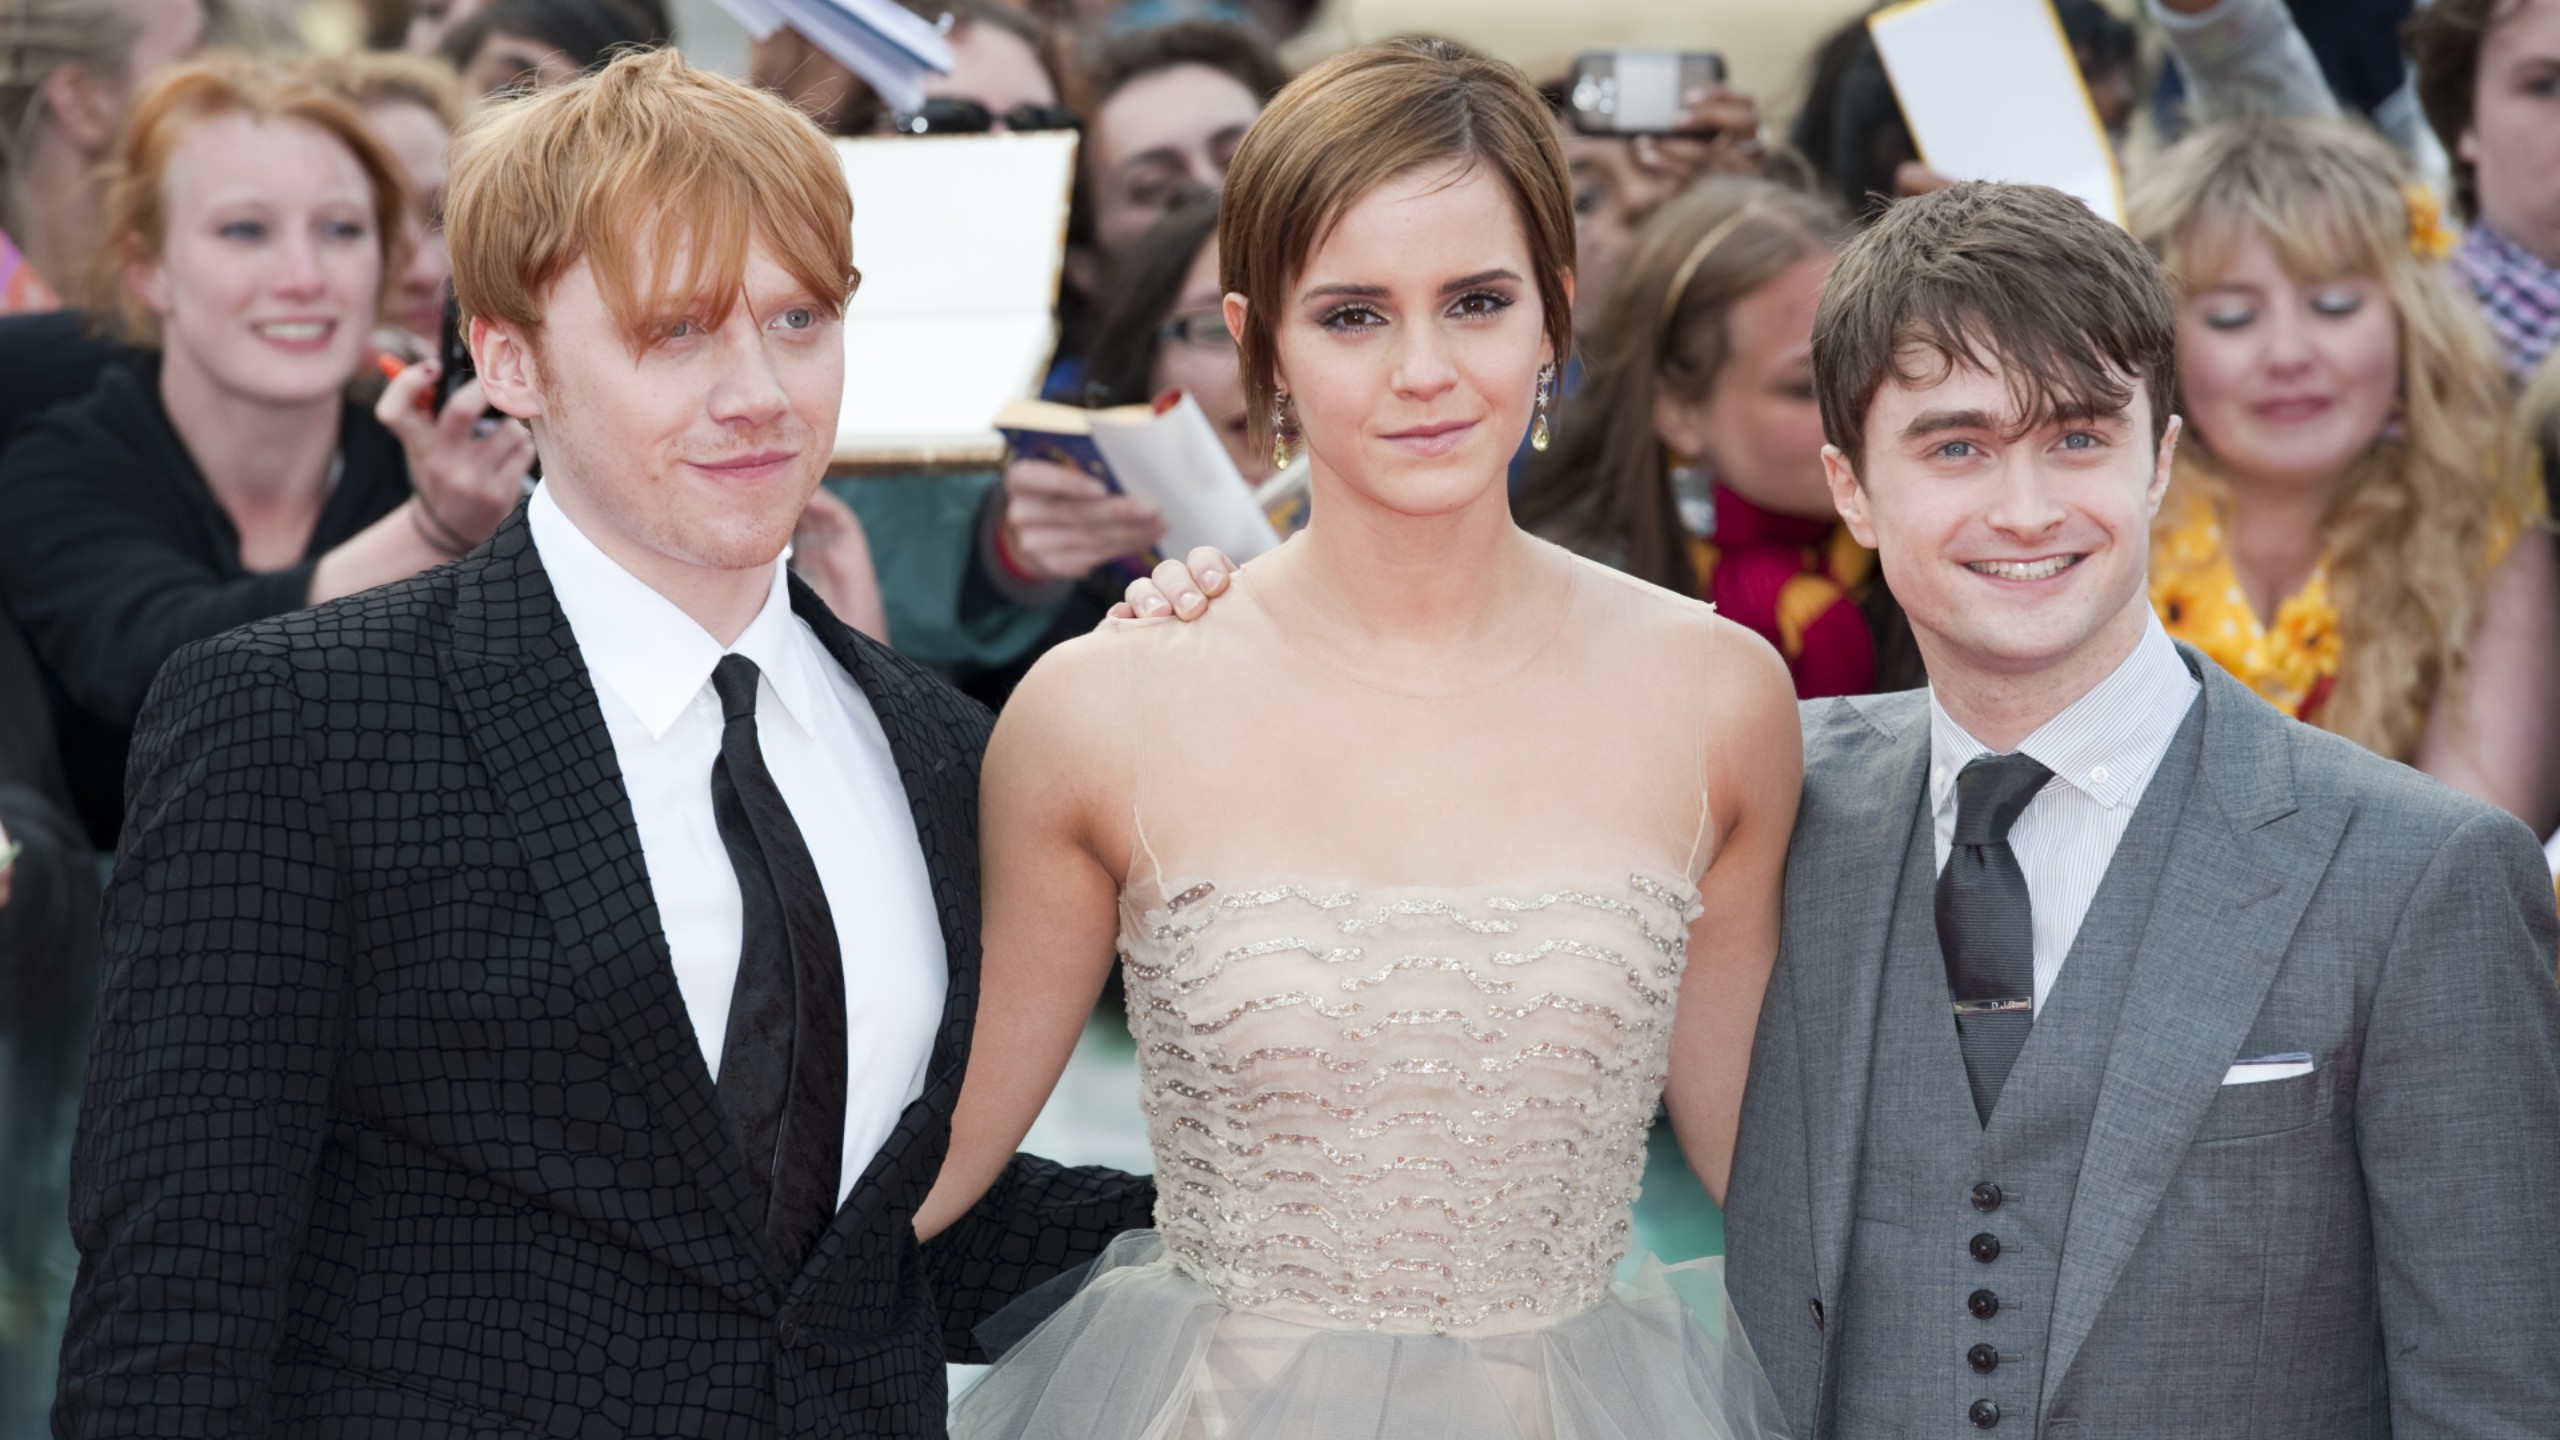 Harry Potter' Stars Return to Hogwarts in Official HBO Max Reunion